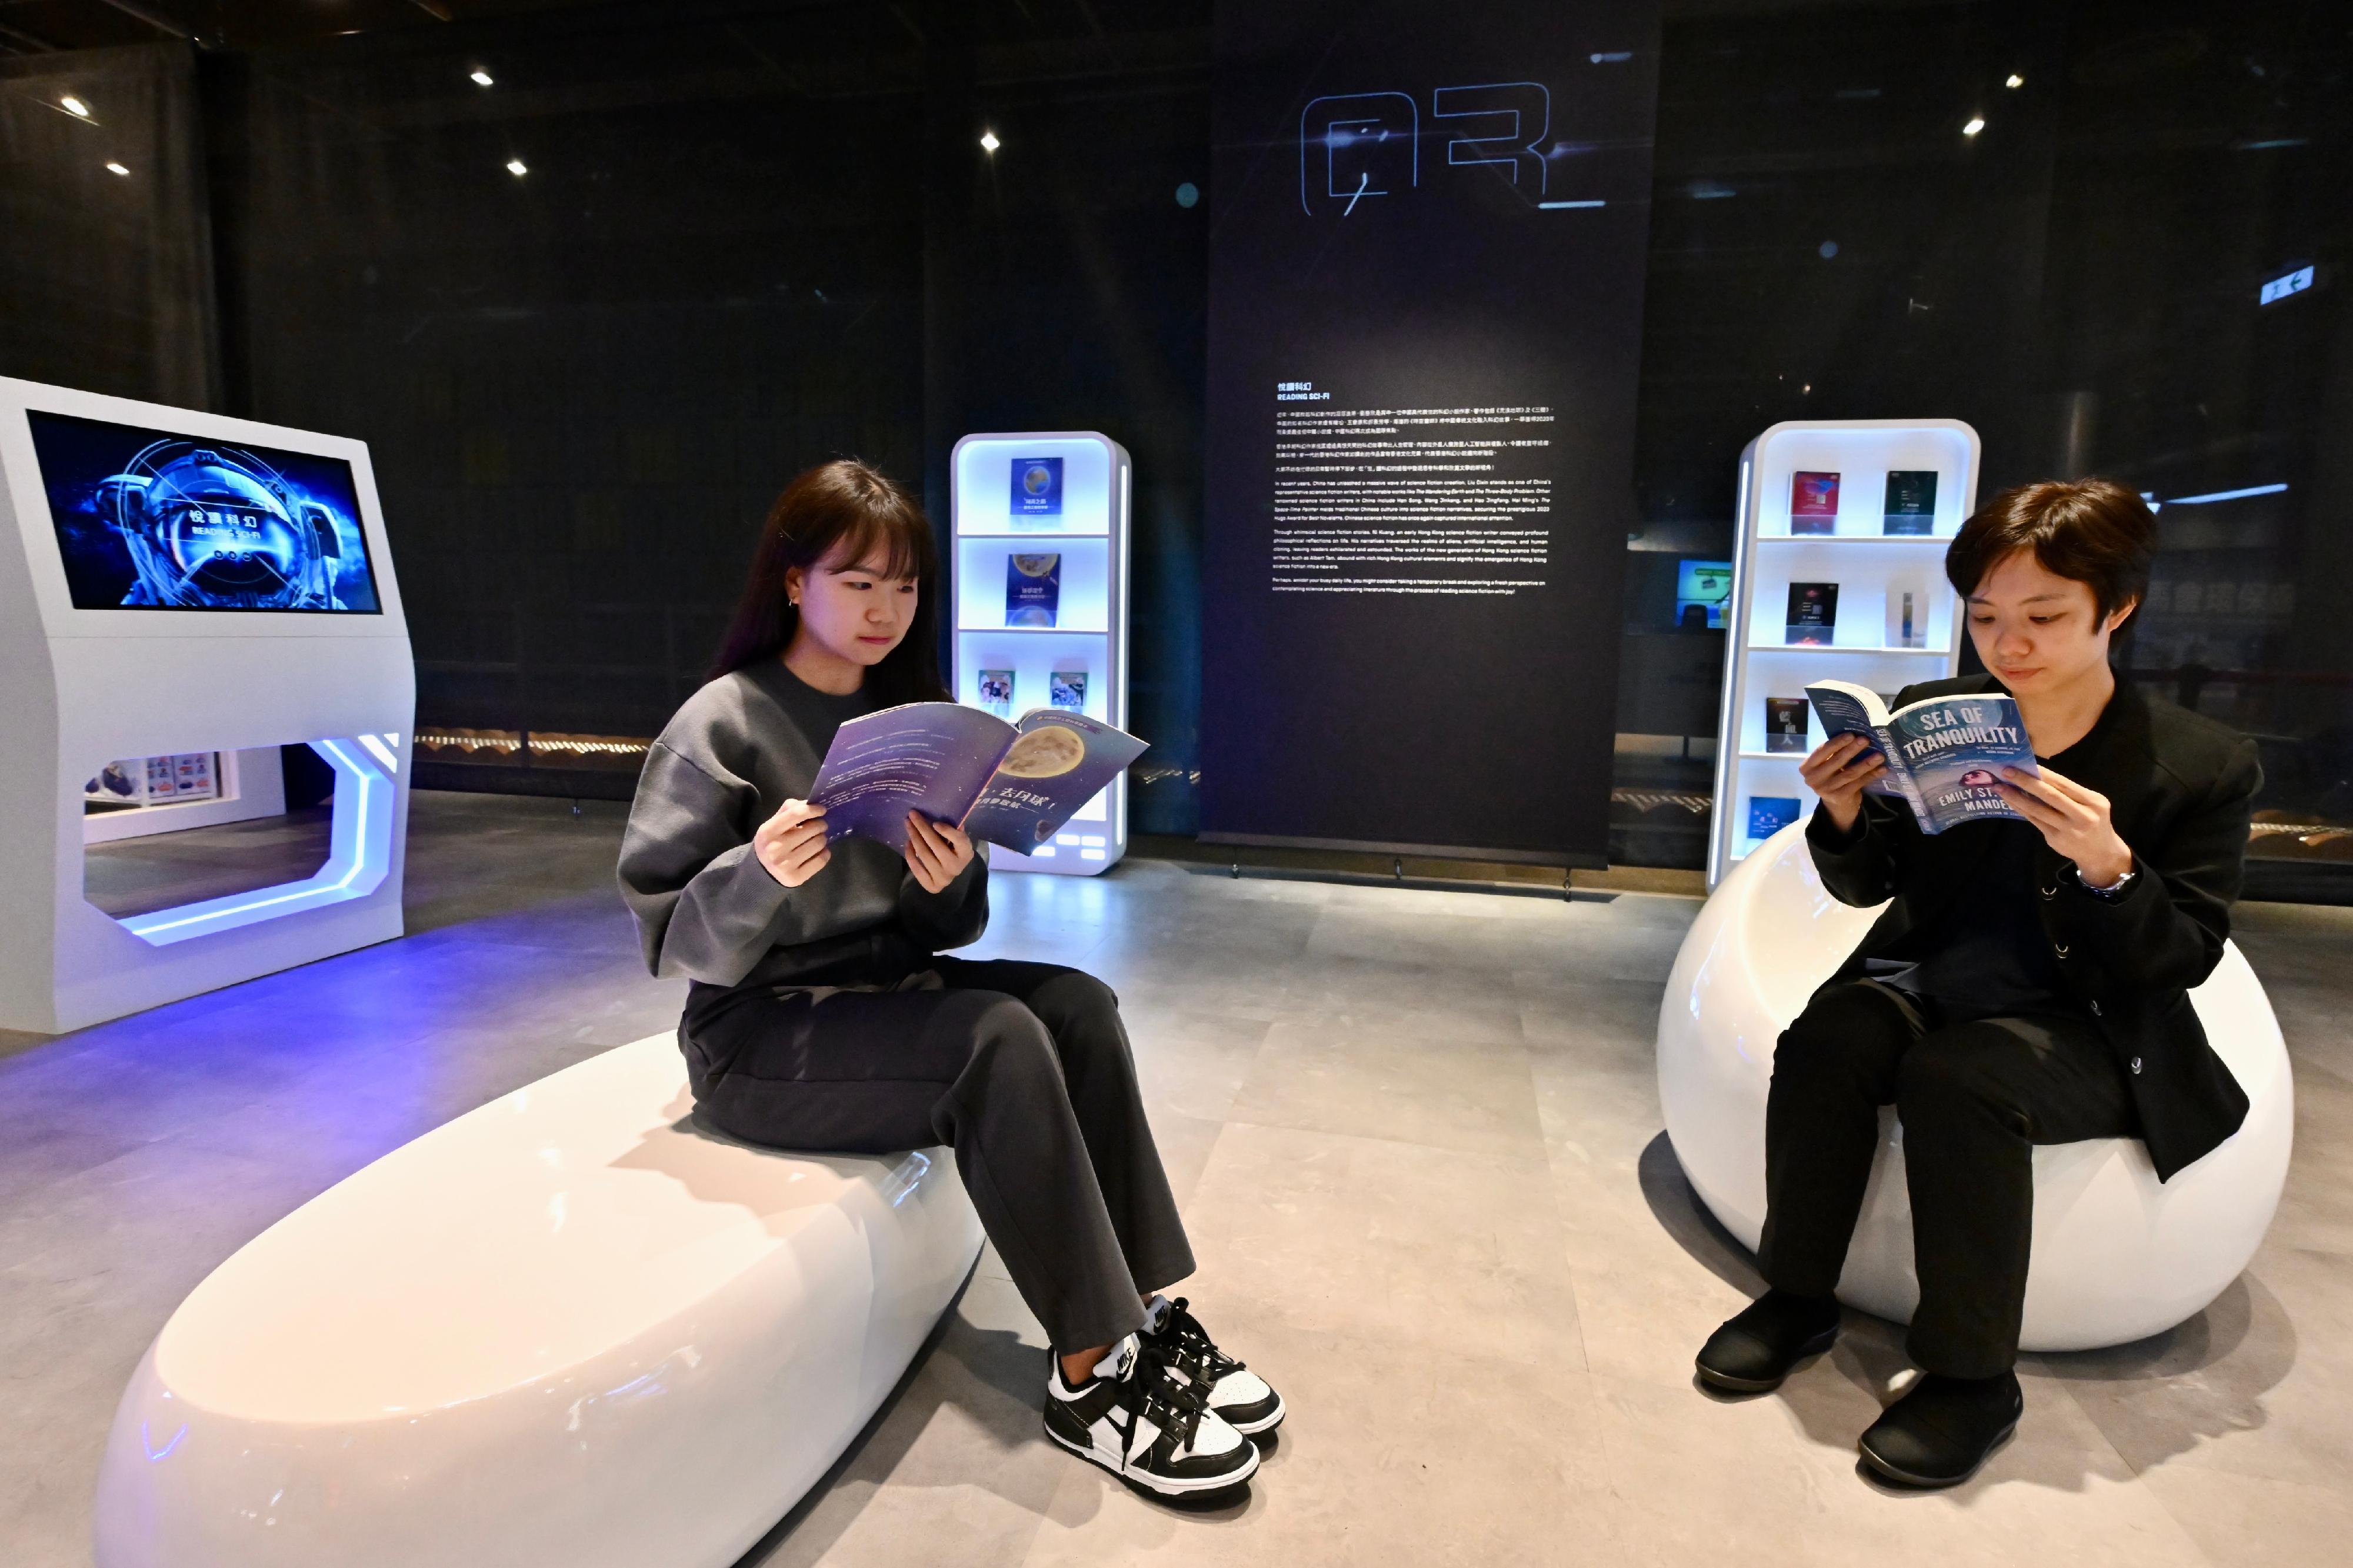 The Hong Kong Science Museum will launch a new special exhibition, "Science Fiction: Voyage to the Edge of Imagination", tomorrow (December 15). The exhibition displays science fiction books selected by the Hong Kong Science Museum and Hong Kong Public Libraries.